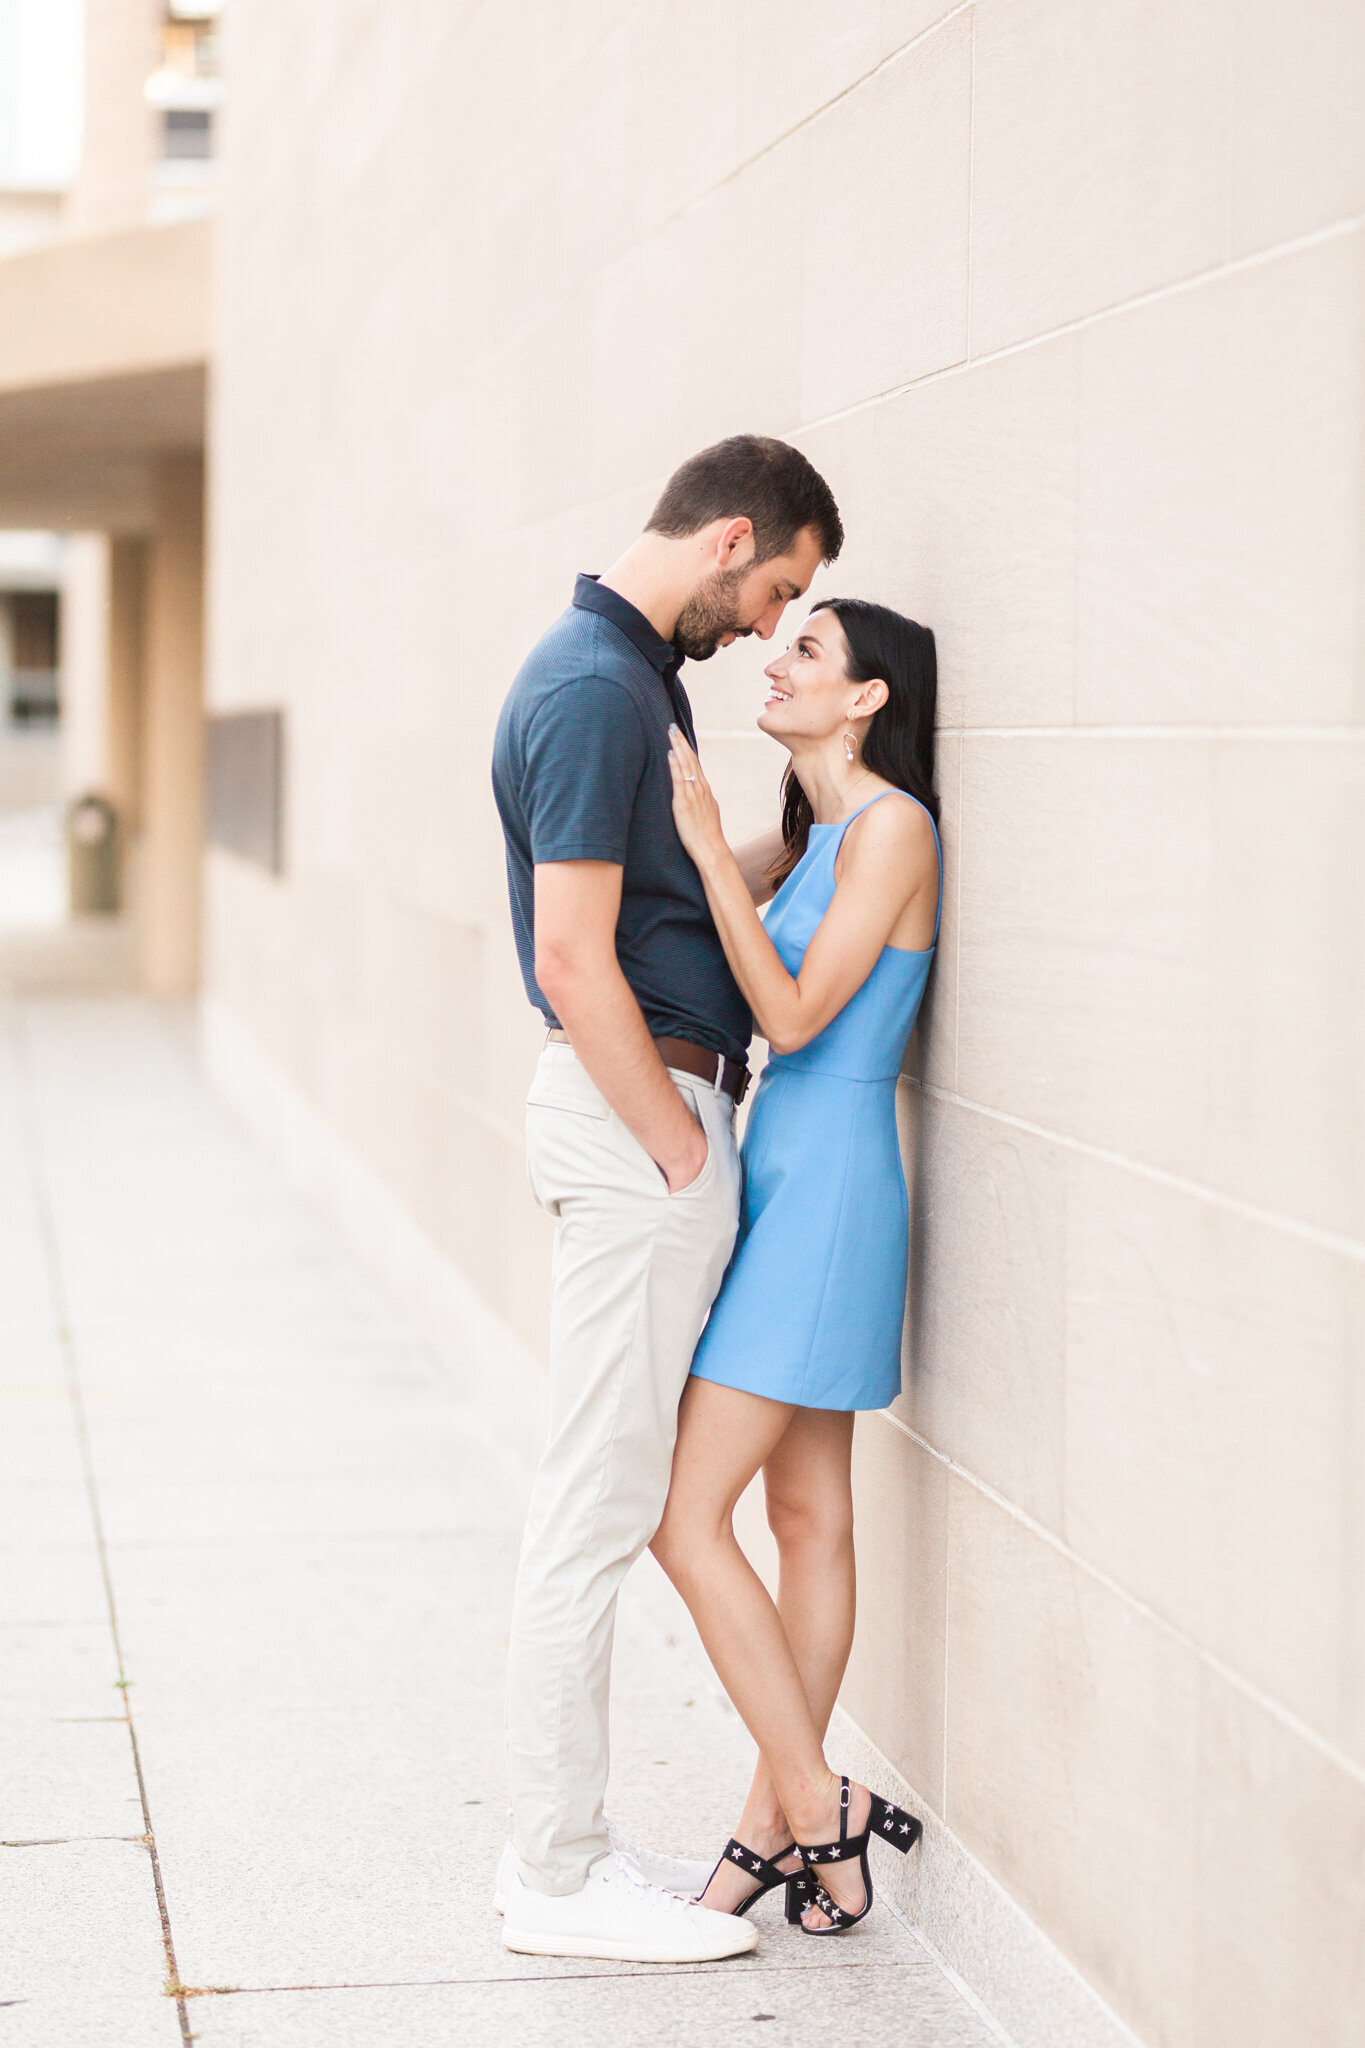 Zack & Hope Engagement Session in the Dallas Arts District Winspear Opera House & Meyerson Symphony Center | DFW Wedding & Portrait Photographer-1